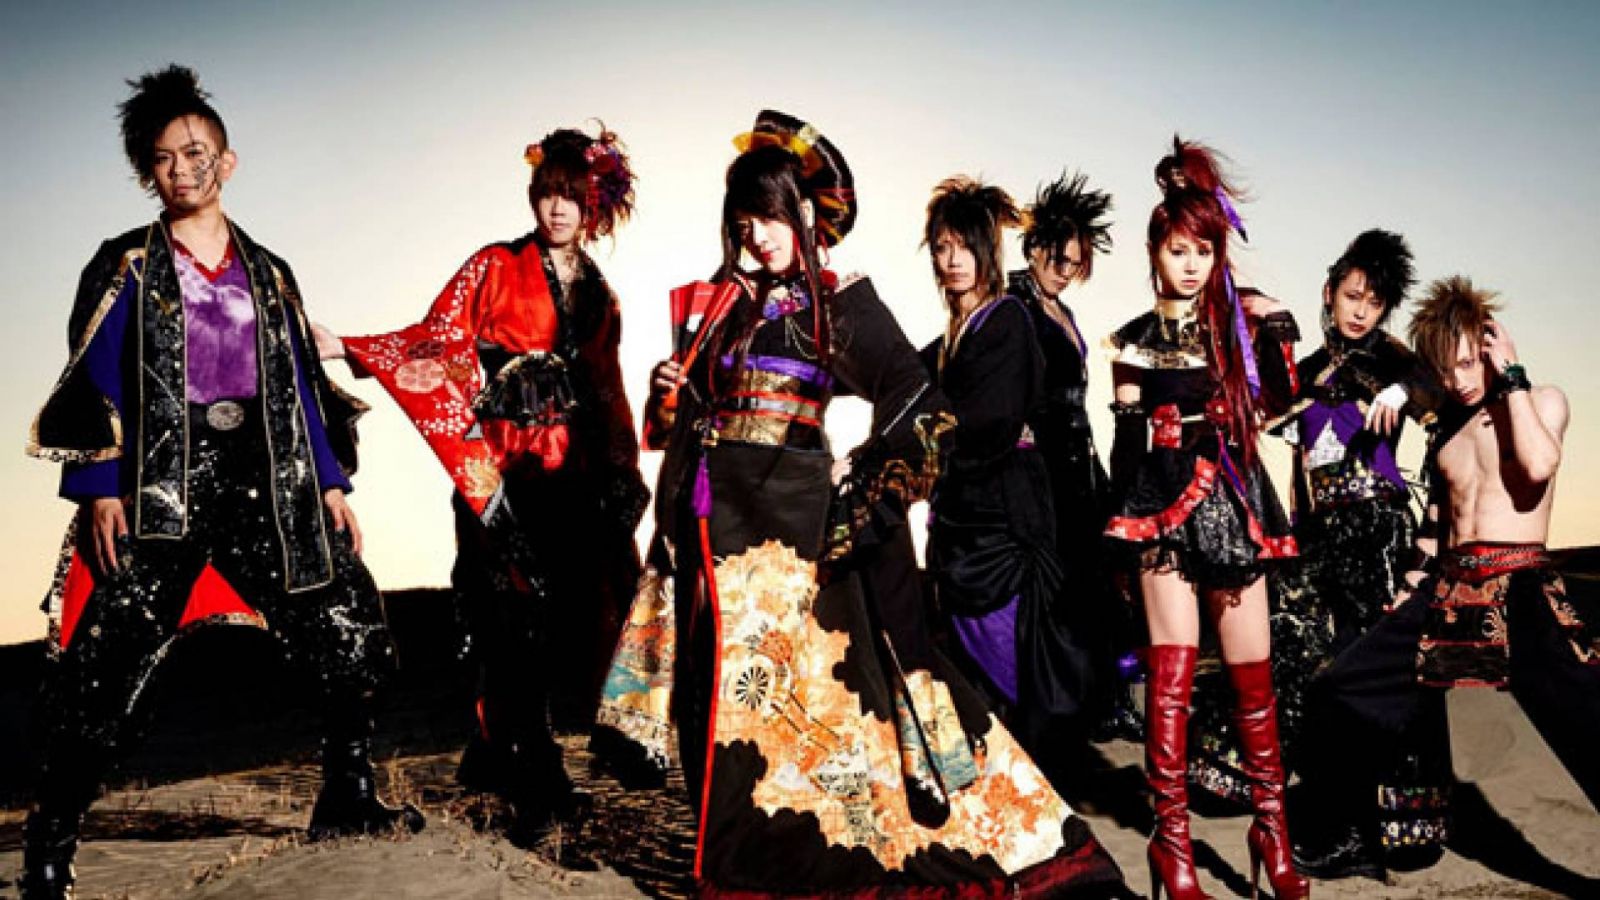 Interview with WagakkiBand © 2015 Avex Music Creative Inc. Provided by Cool Japan Music, Inc.